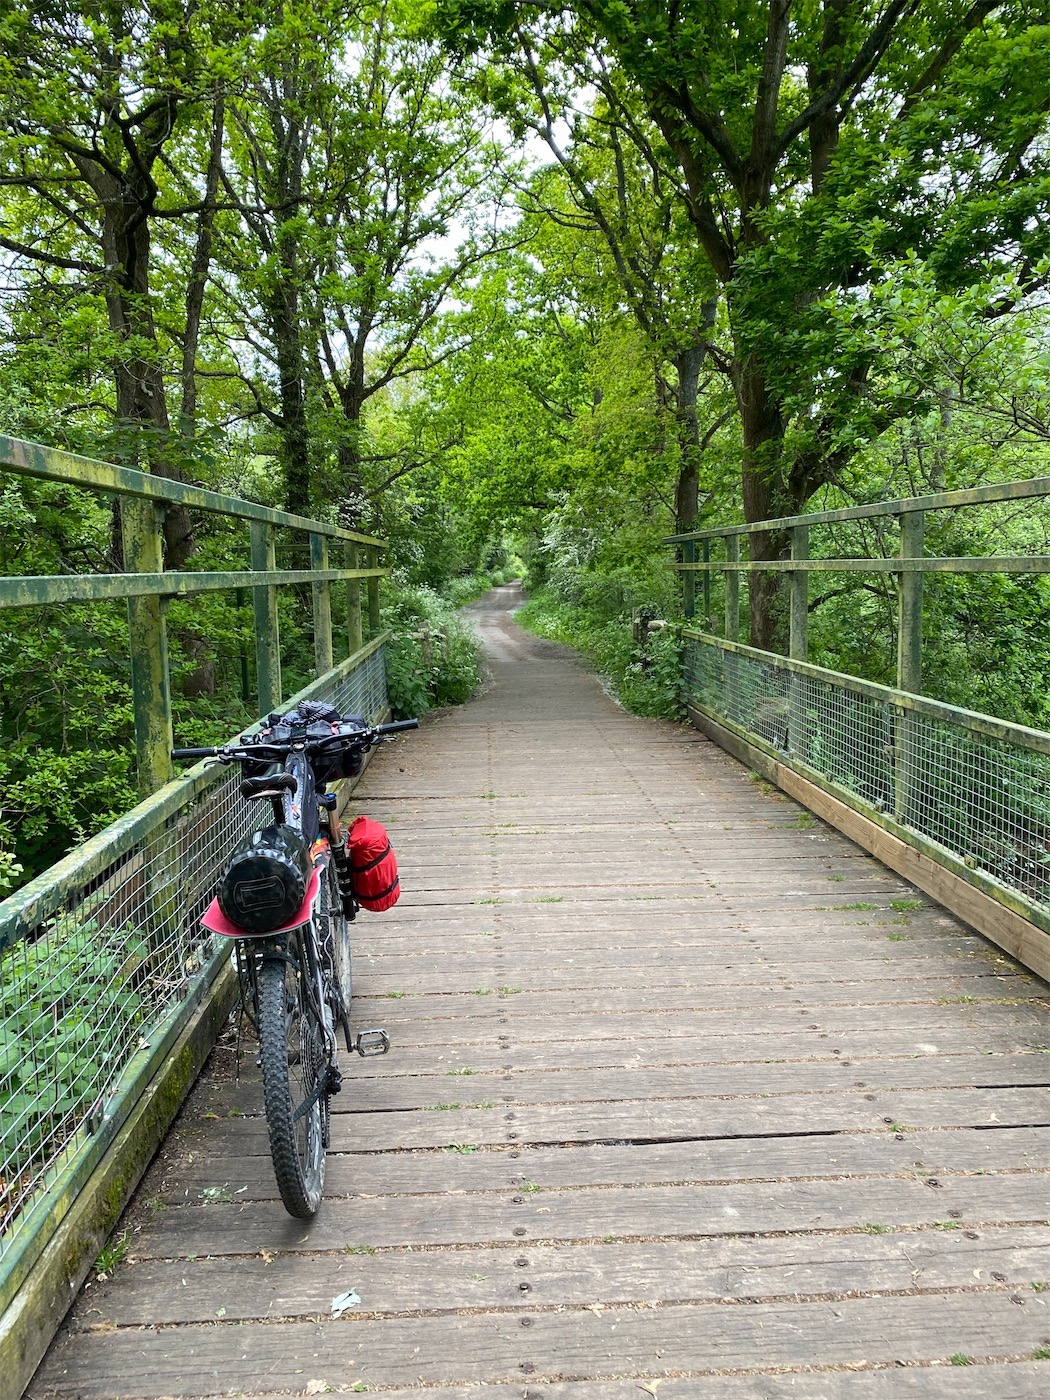 About half the route was on an old railway, so it was nice to be able to blast straight along away from traffic